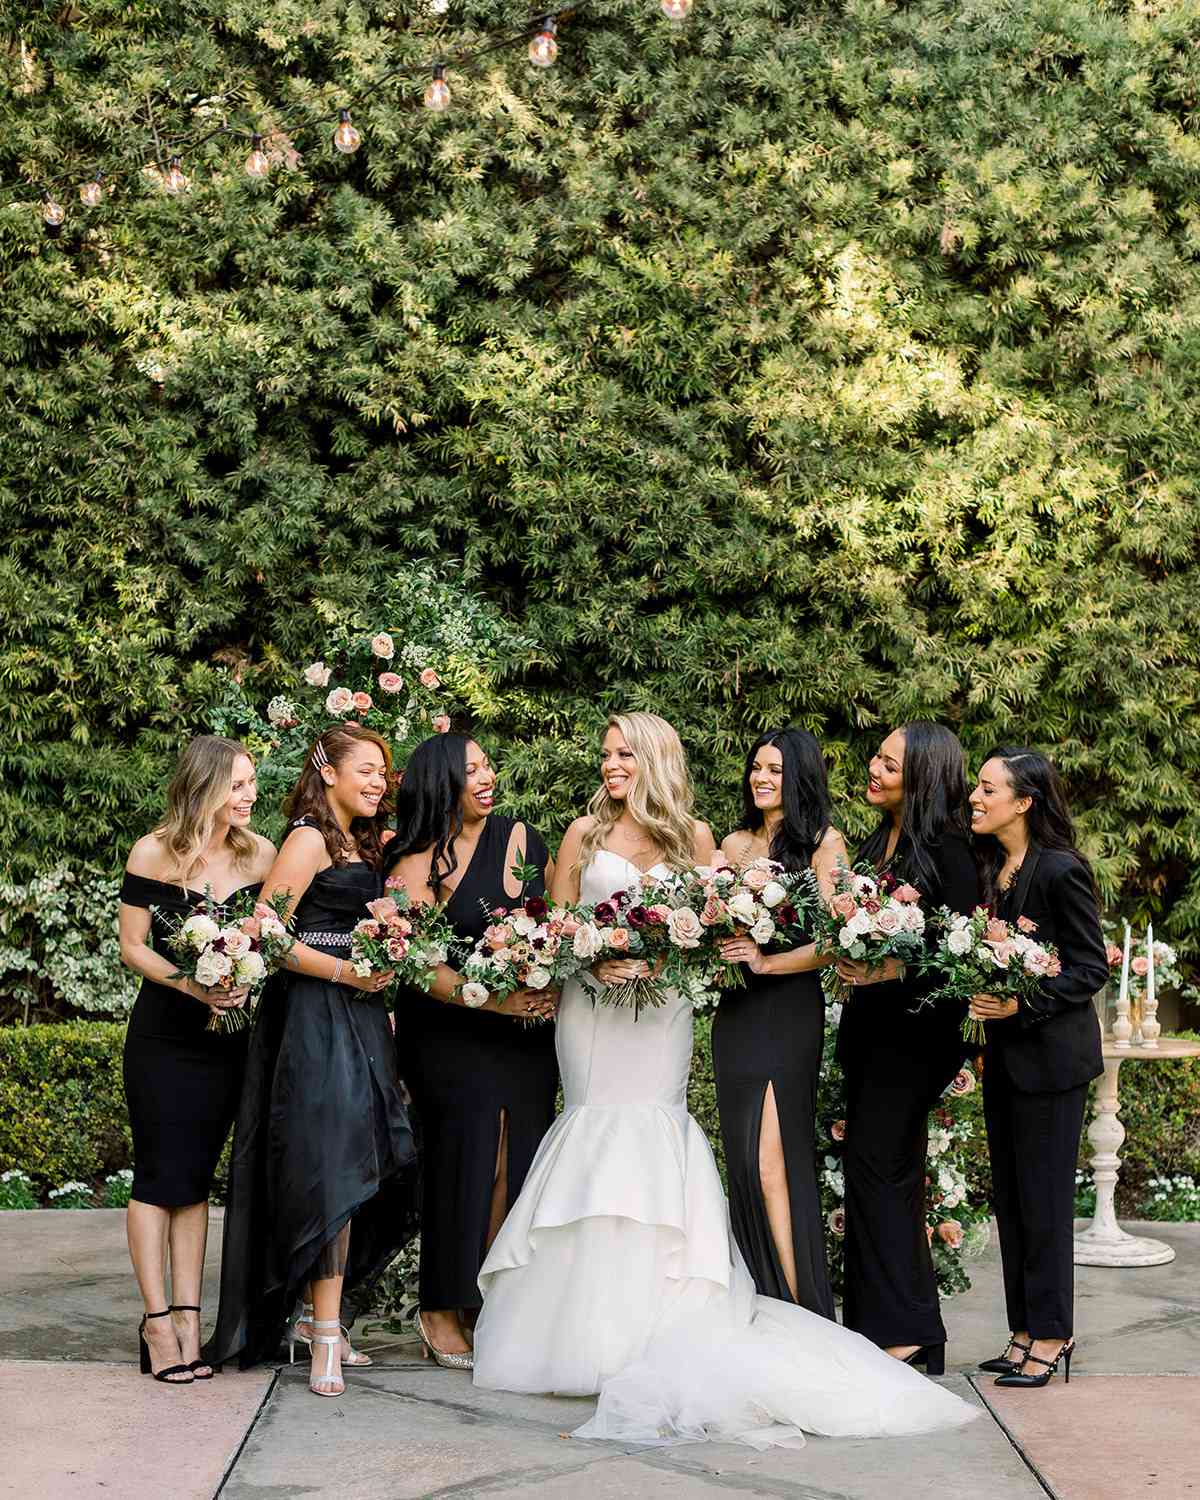 bride and bridesmaids in black against greenery wall